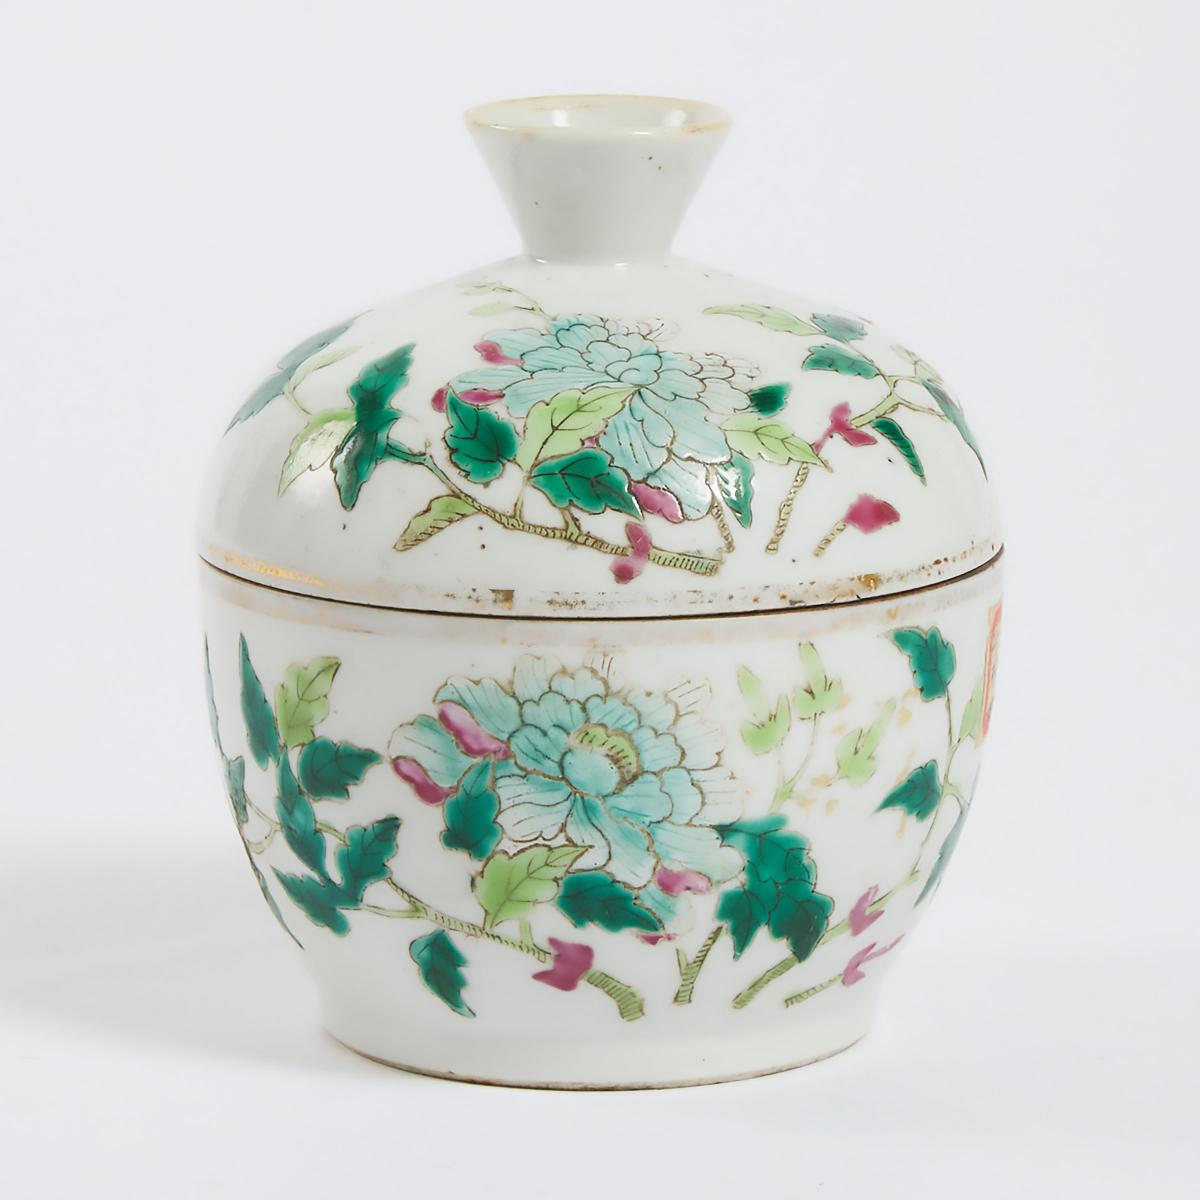 A Chinese Enameled Porcelain Bowl and Cover, Tongzhi Mark, Republican Period, 民国时期 同治款彩瓷盖碗, height 4